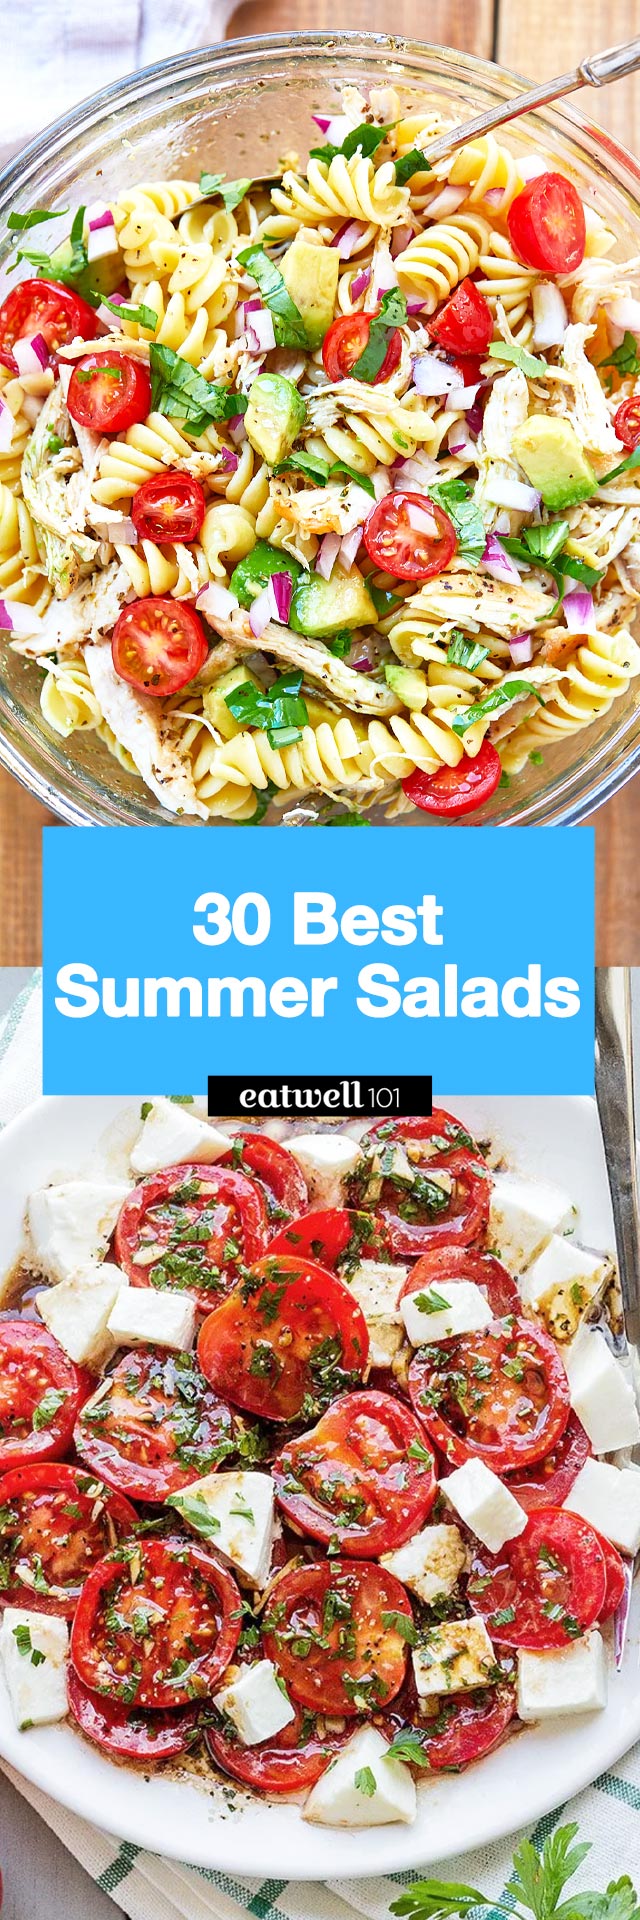 Summer Salad Recipes - #summer #salad #recipes #eatwell101 - These easy summer salad recipes will help you get a healthy dinner or side dish on the table in no time!